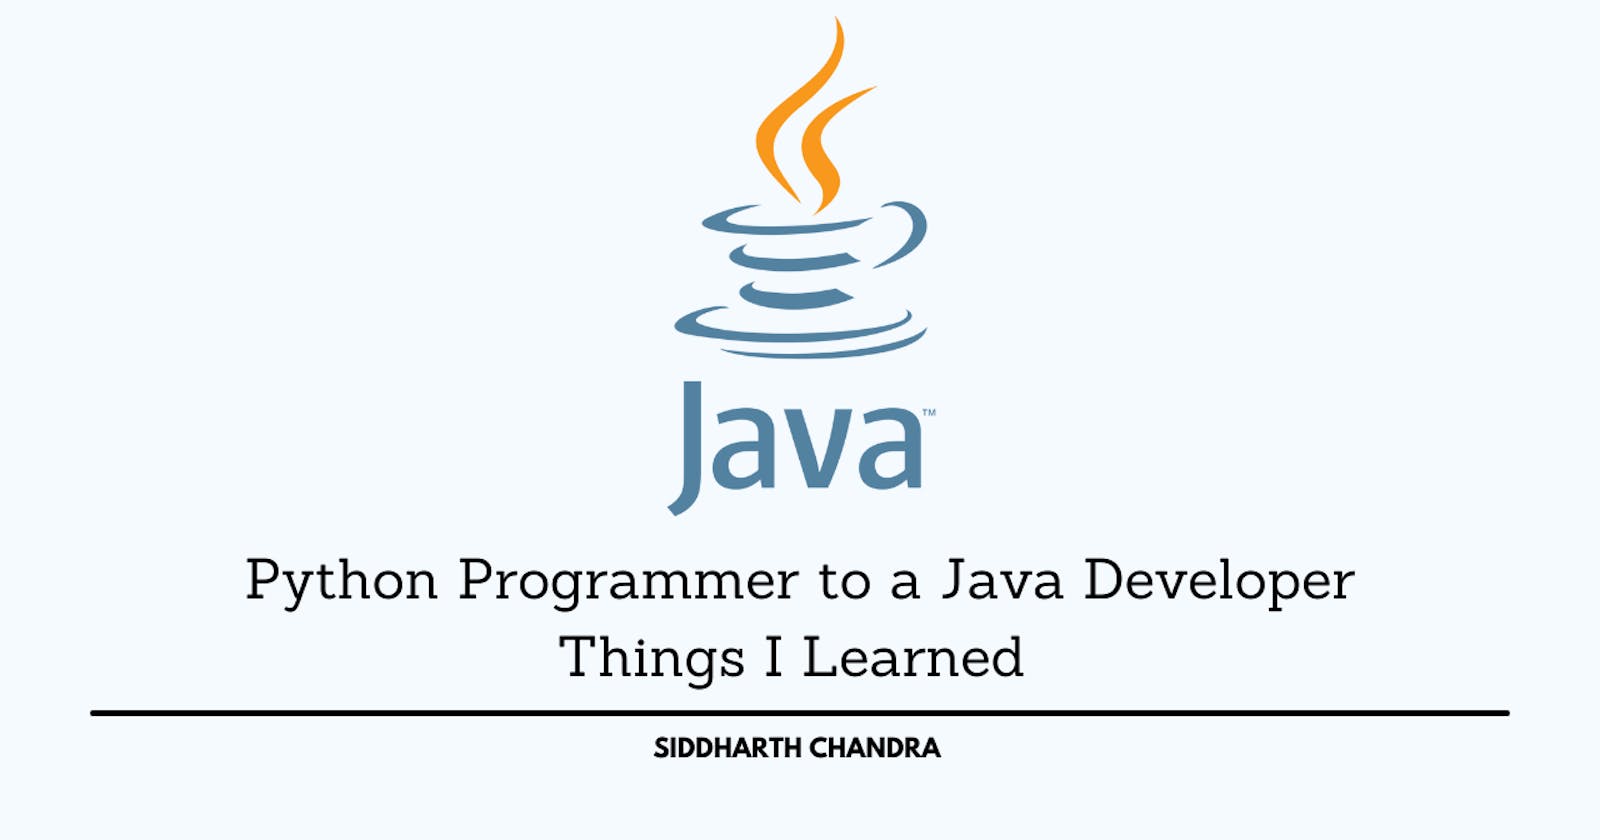 Python Programmer to a Java Developer: Things I Learned